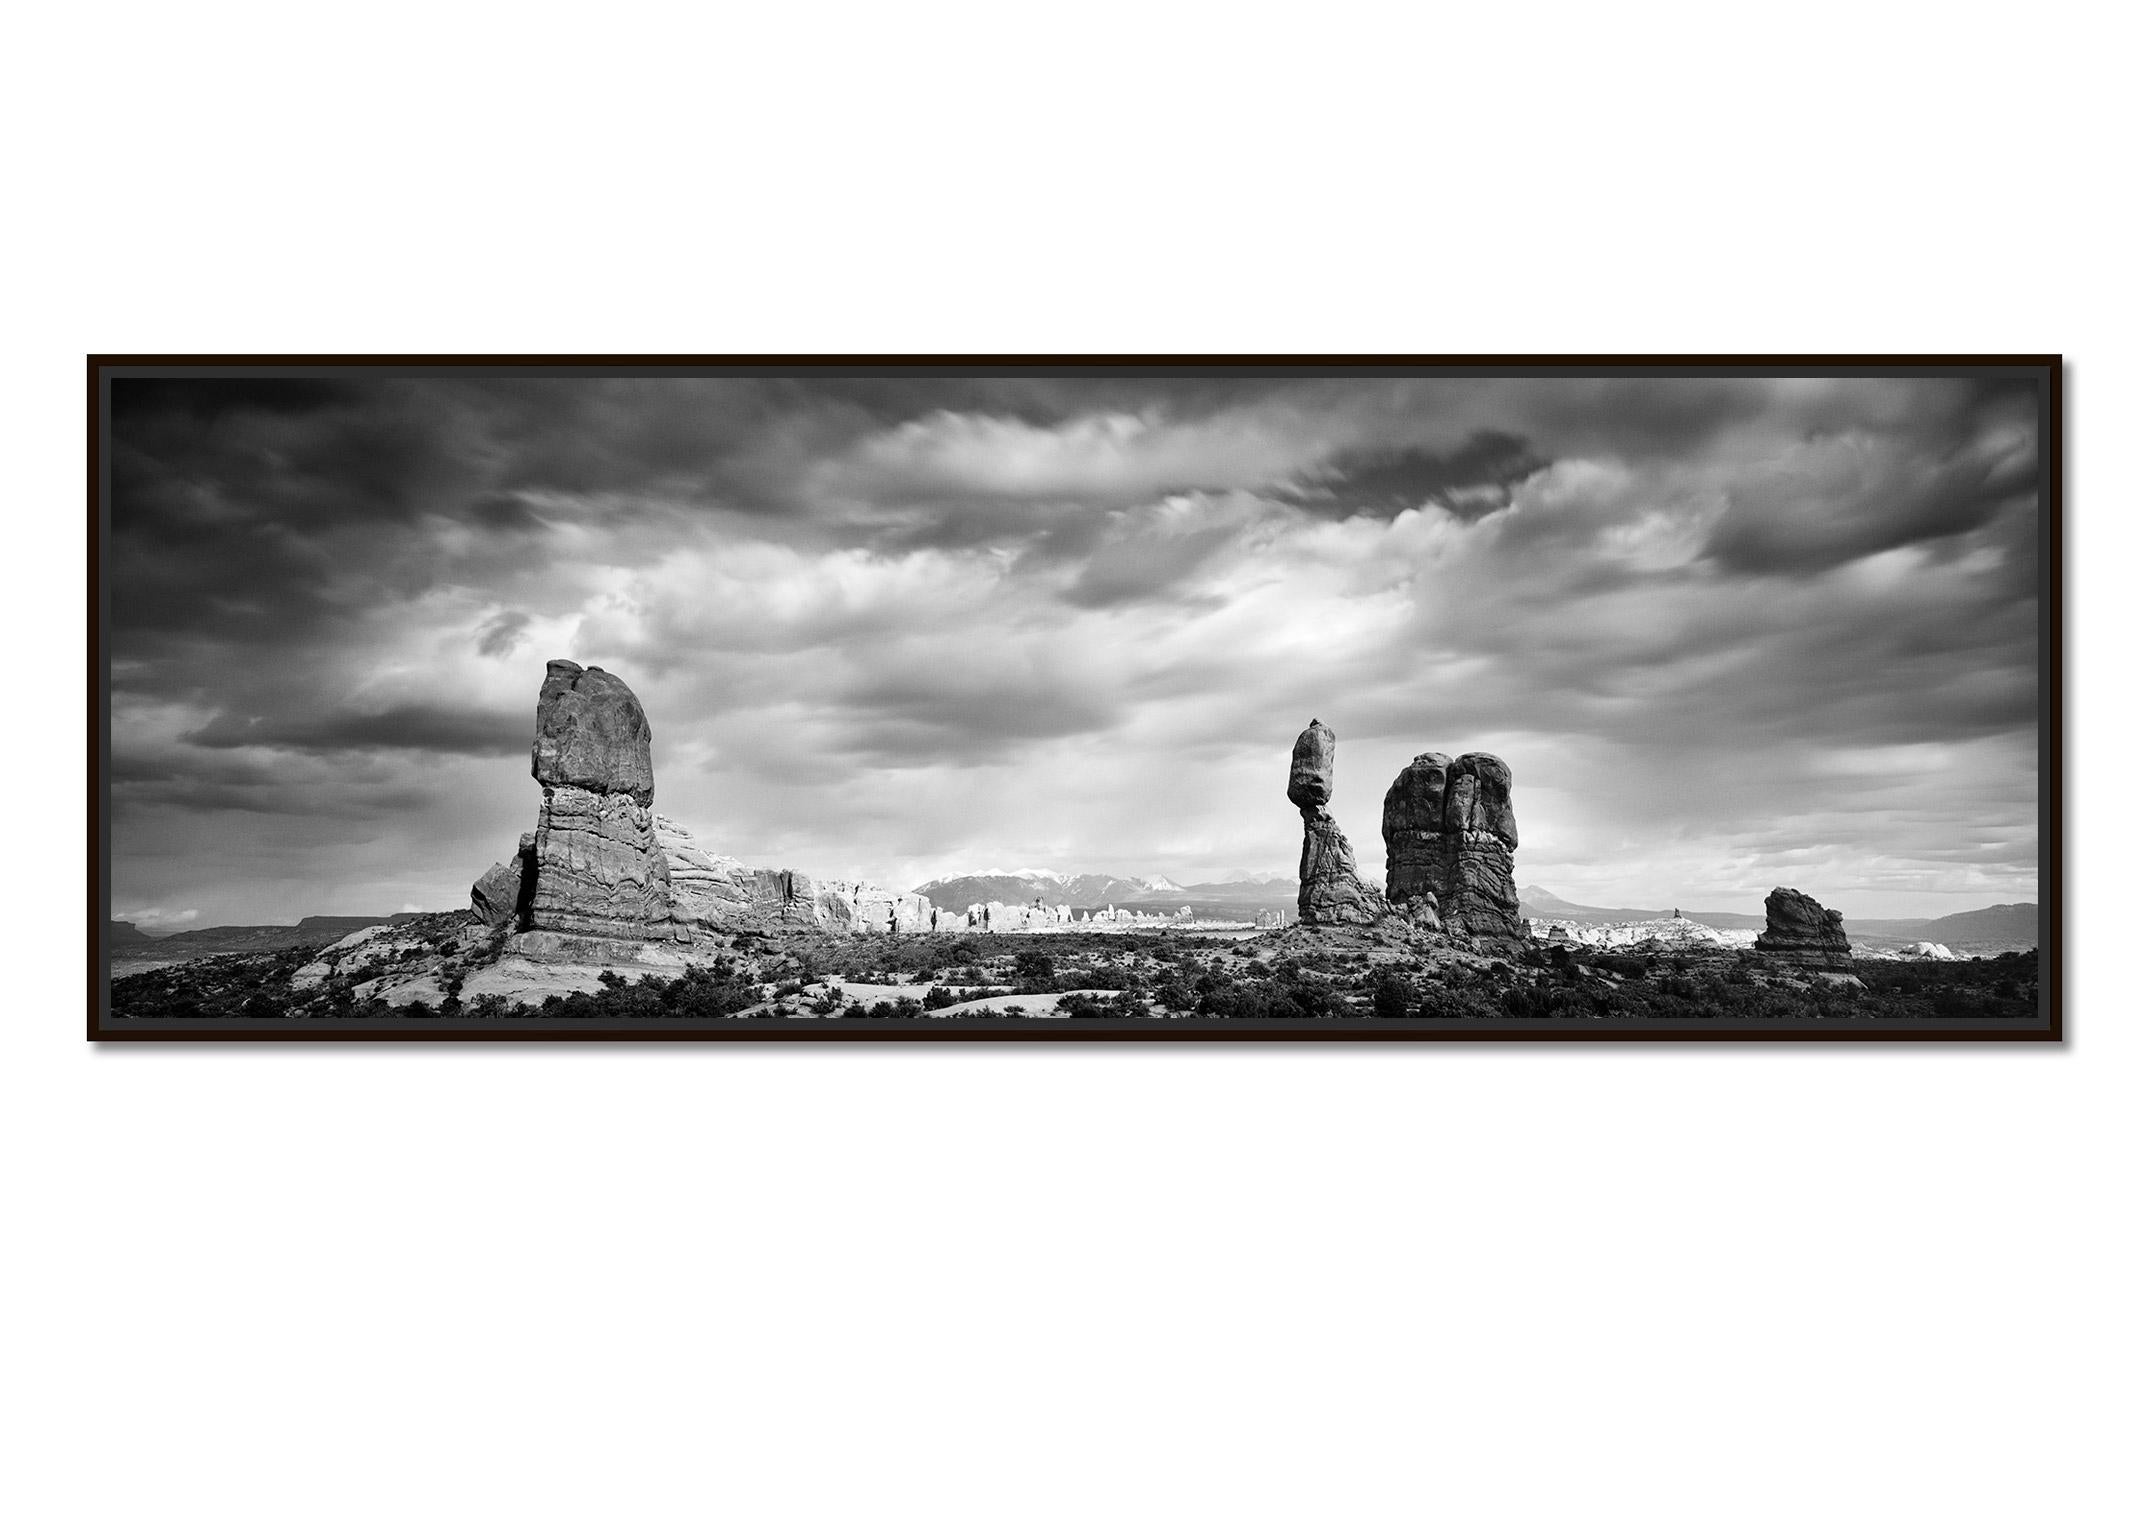 Wild West Panorama, Utah National Park, USA, black white landscape photography - Photograph by Gerald Berghammer